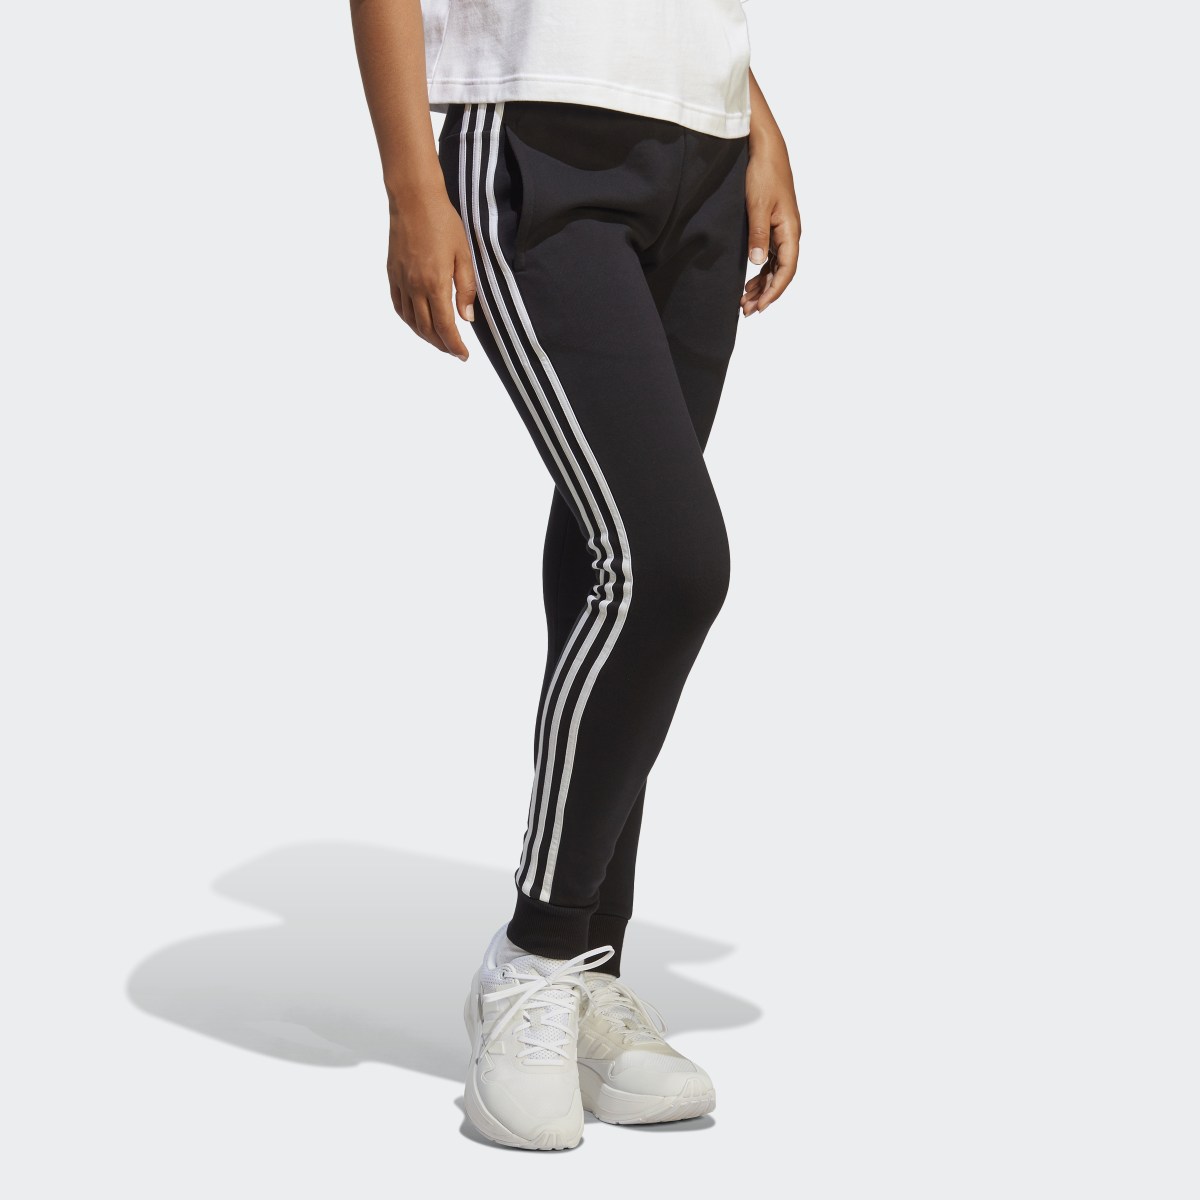 Adidas Essentials 3-Stripes French Terry Cuffed Pants. 4